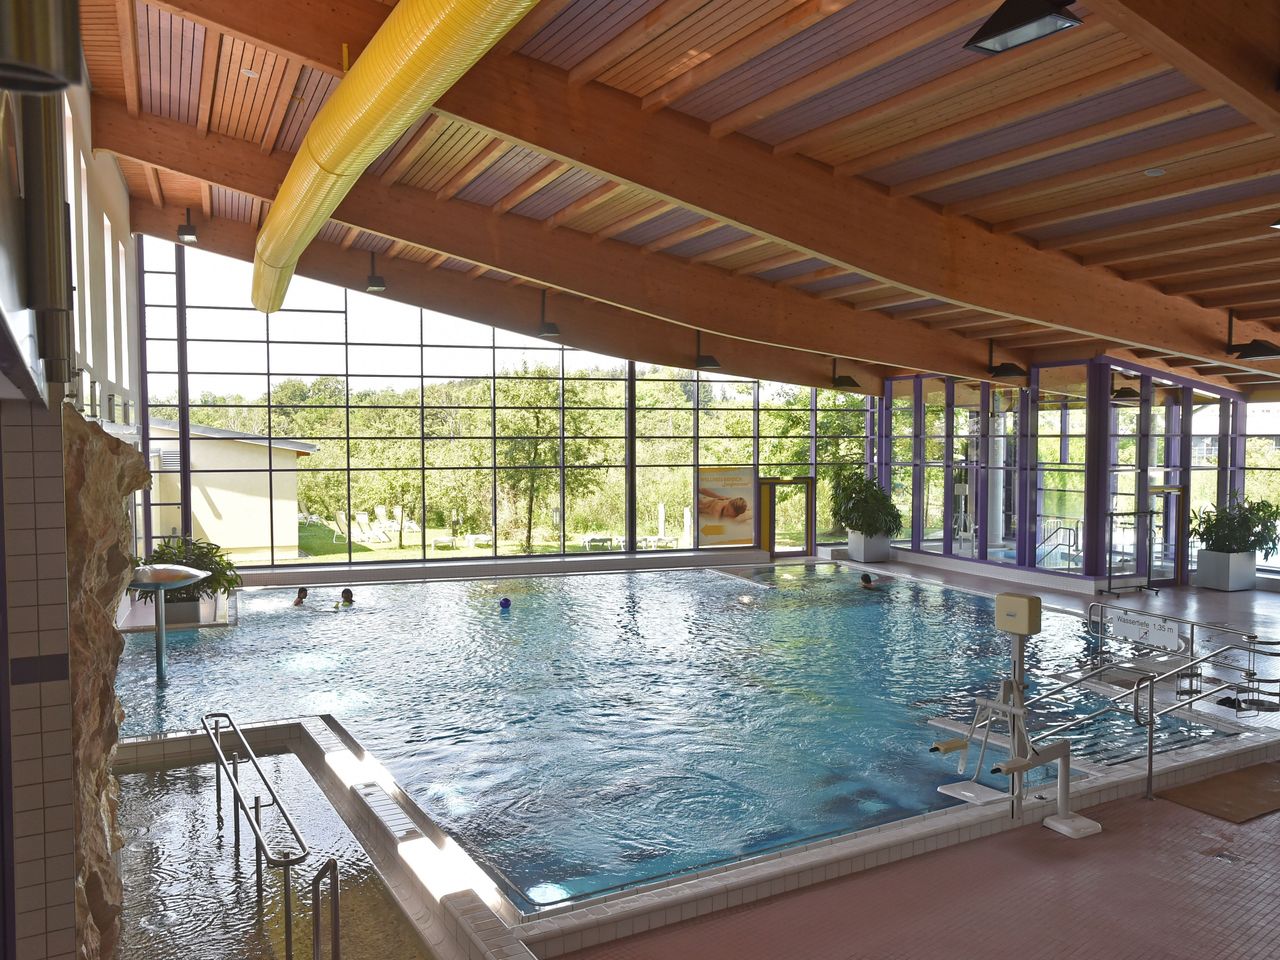 Familien-Sommer-DEAL - 4 Tage Entspannung & Therme